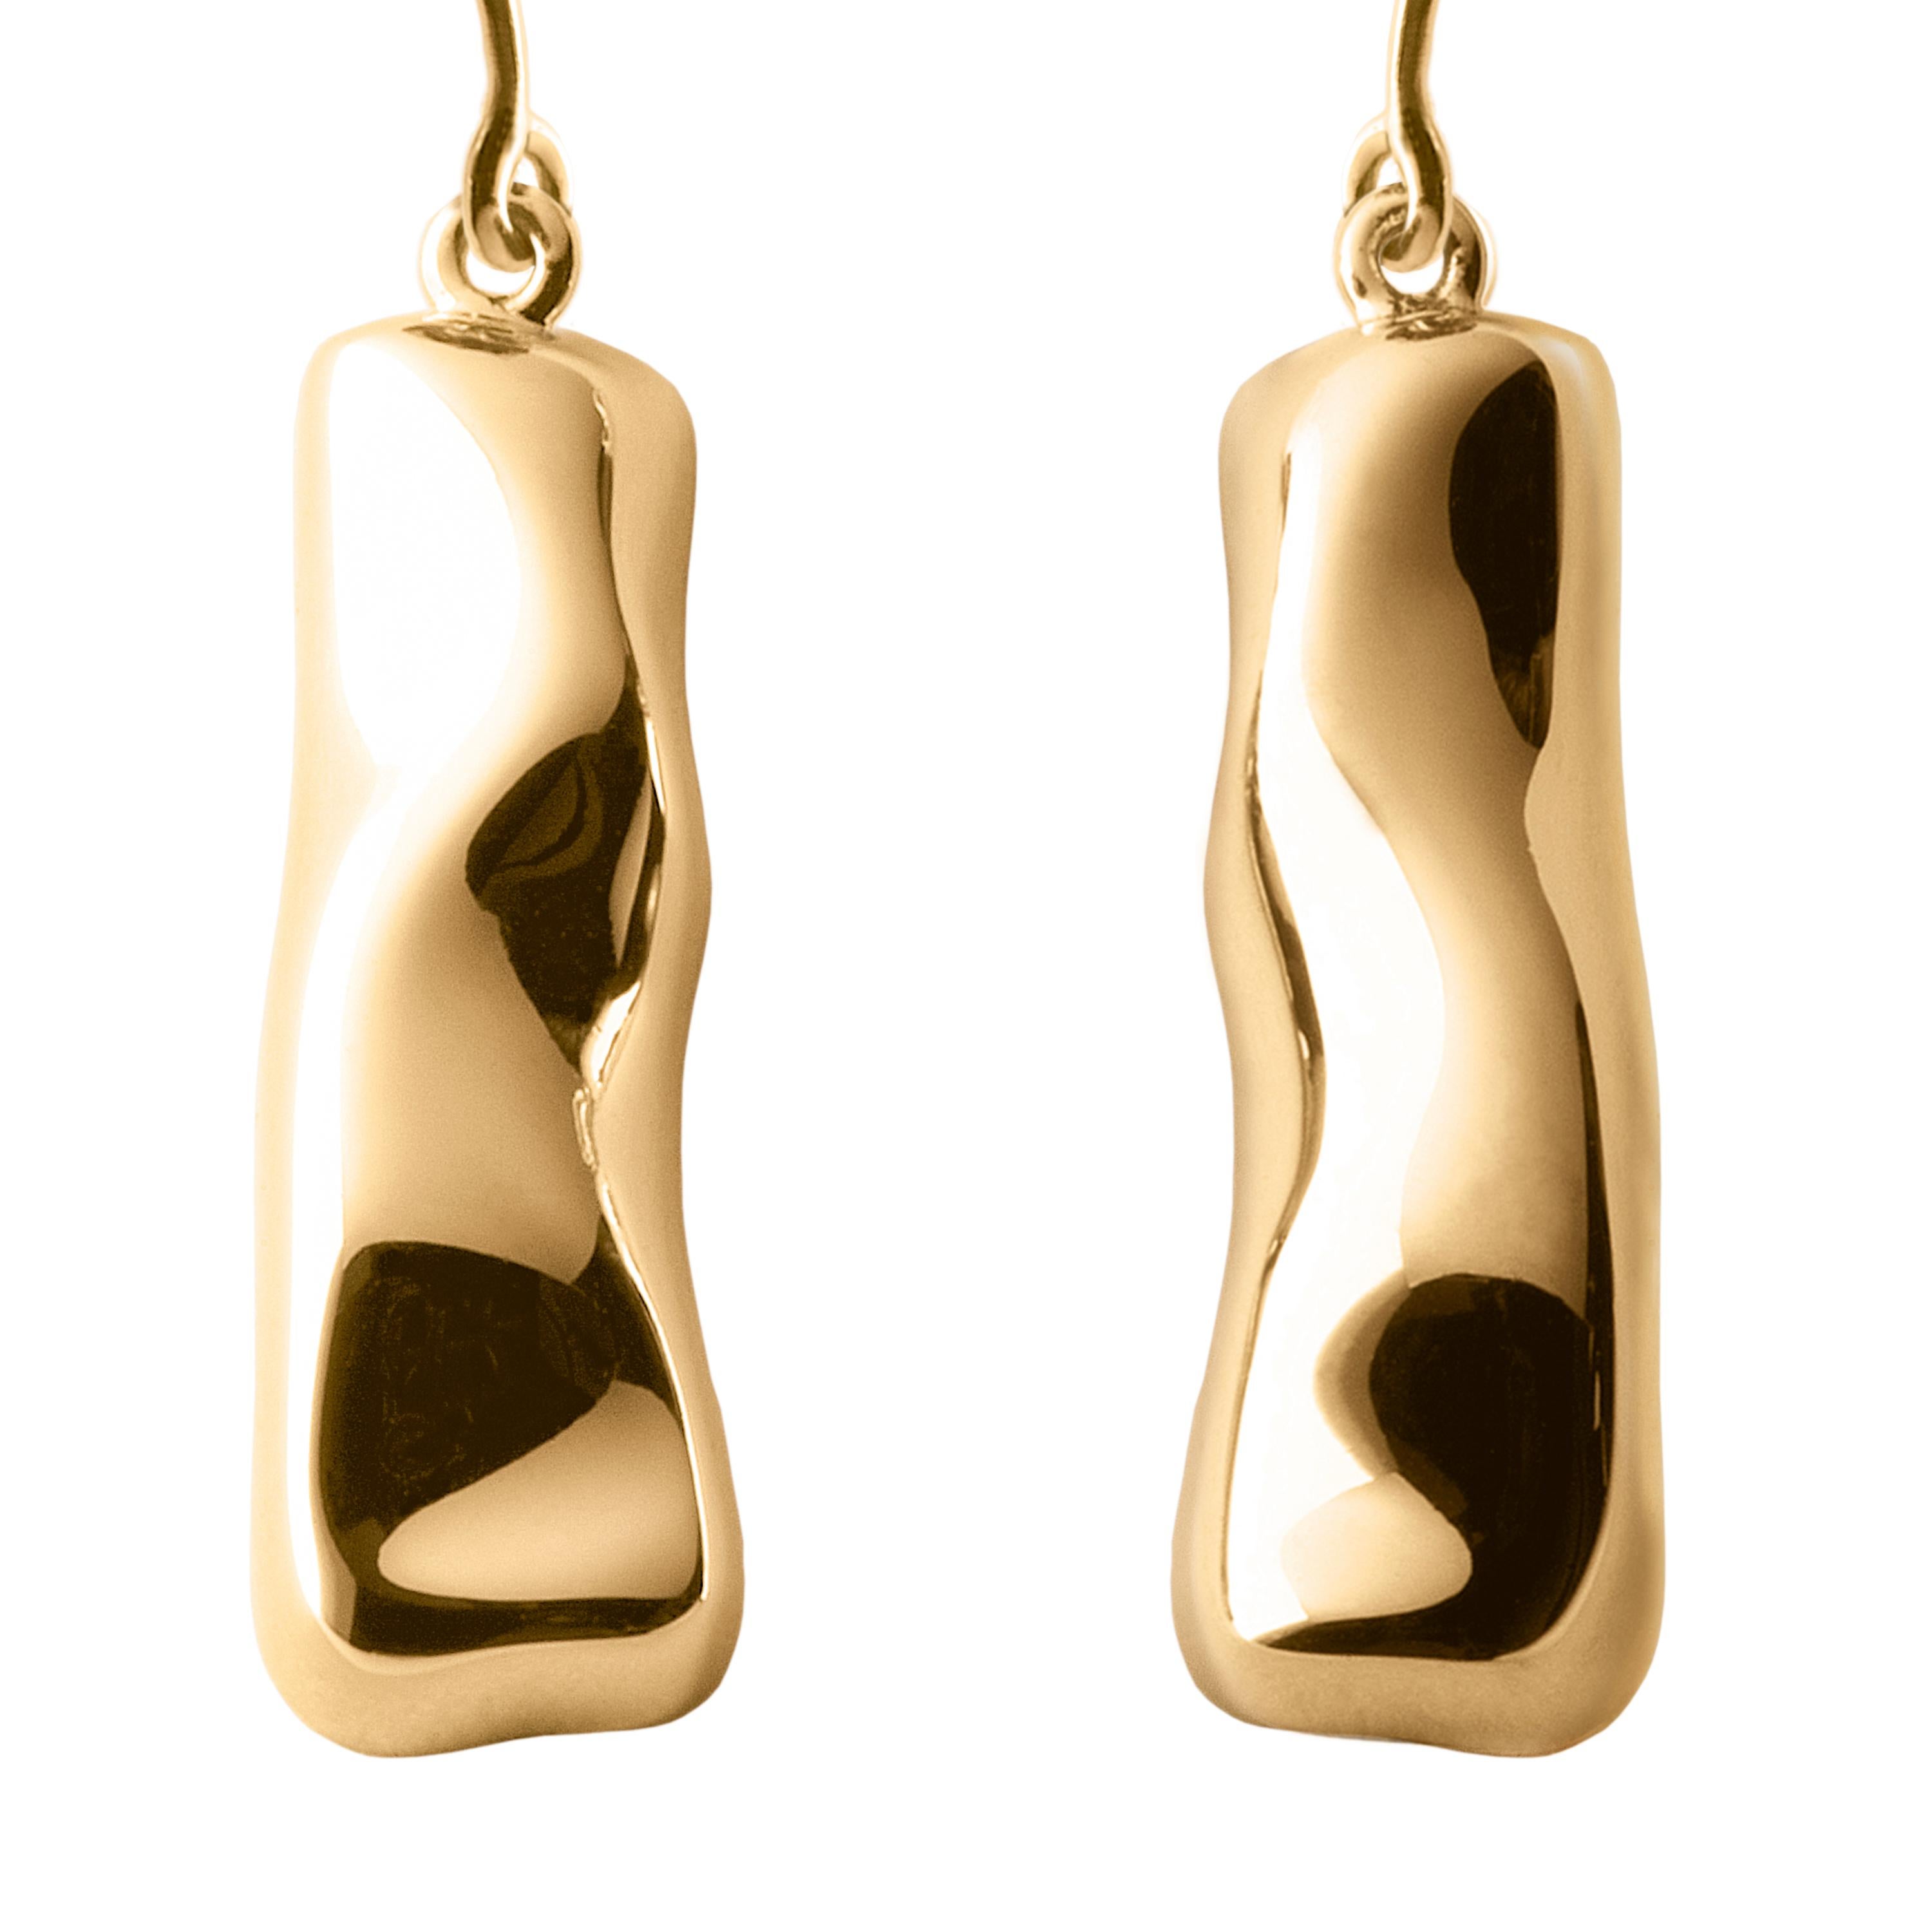 Made by hand in Nathalie Jean's Milan atelier in limited edition, the Mercure contemporary drop dangle Earrings are in 18 karat rosé gold, a warm, sophisticated color close to yellow gold. Small, delicate, ebbing sculptures with seemingly random